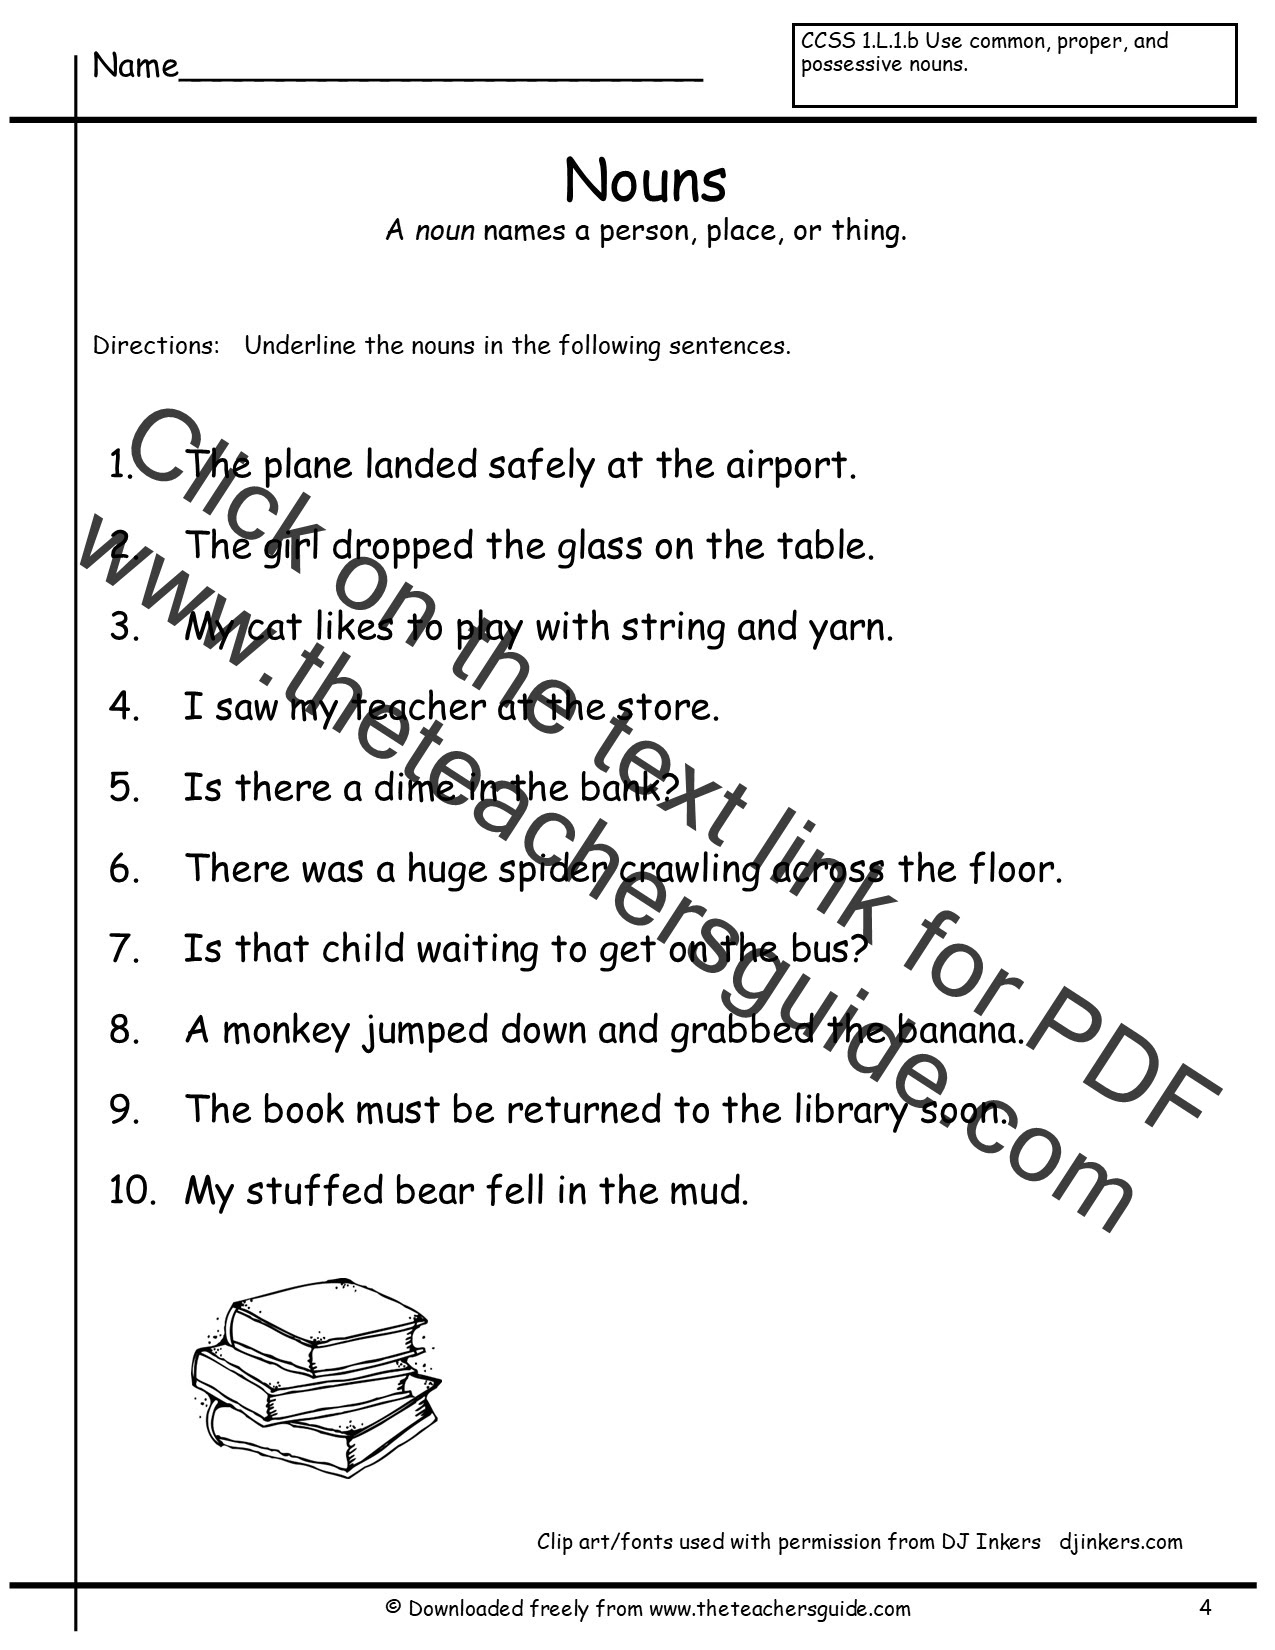 Nouns Exercises For Class 4